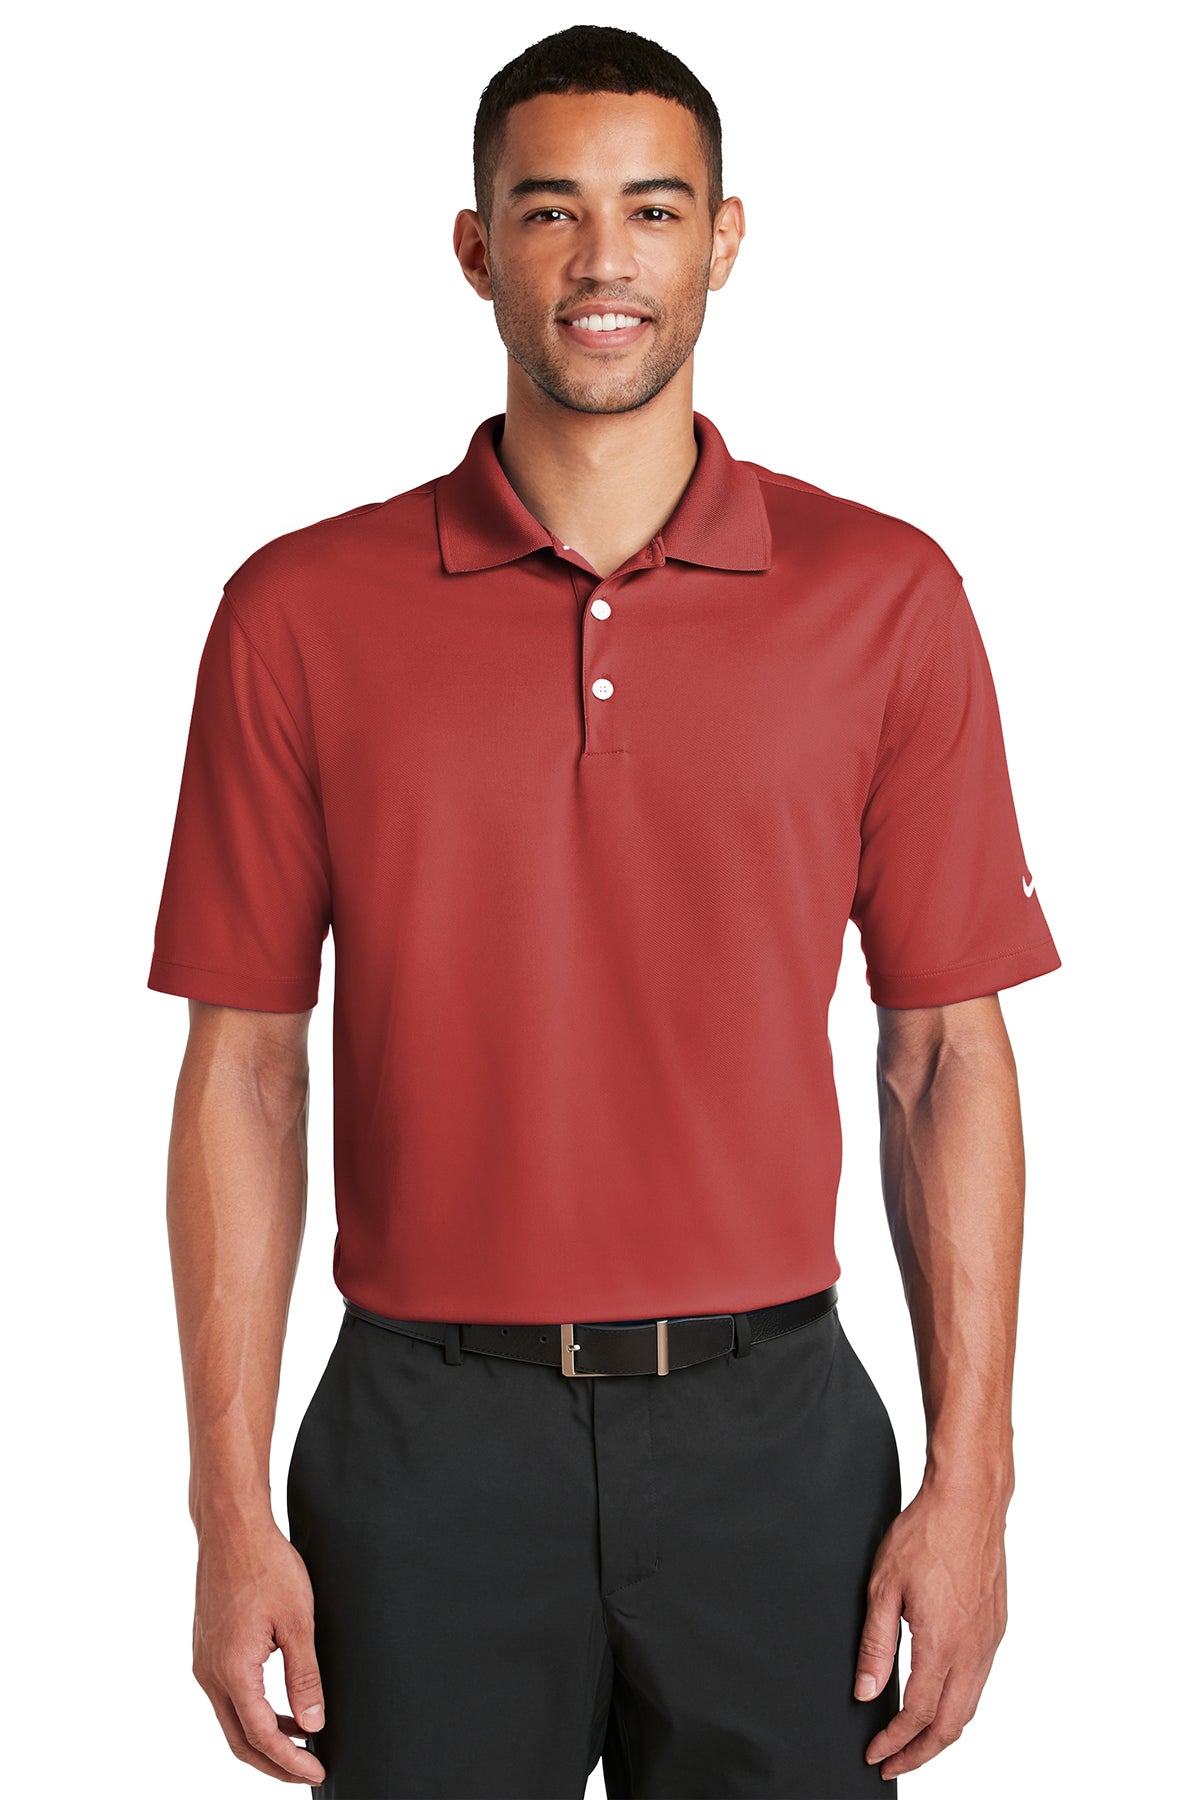 LL (Embroidered) Nike Dri-Fit Golf Forever 6ix Apparel